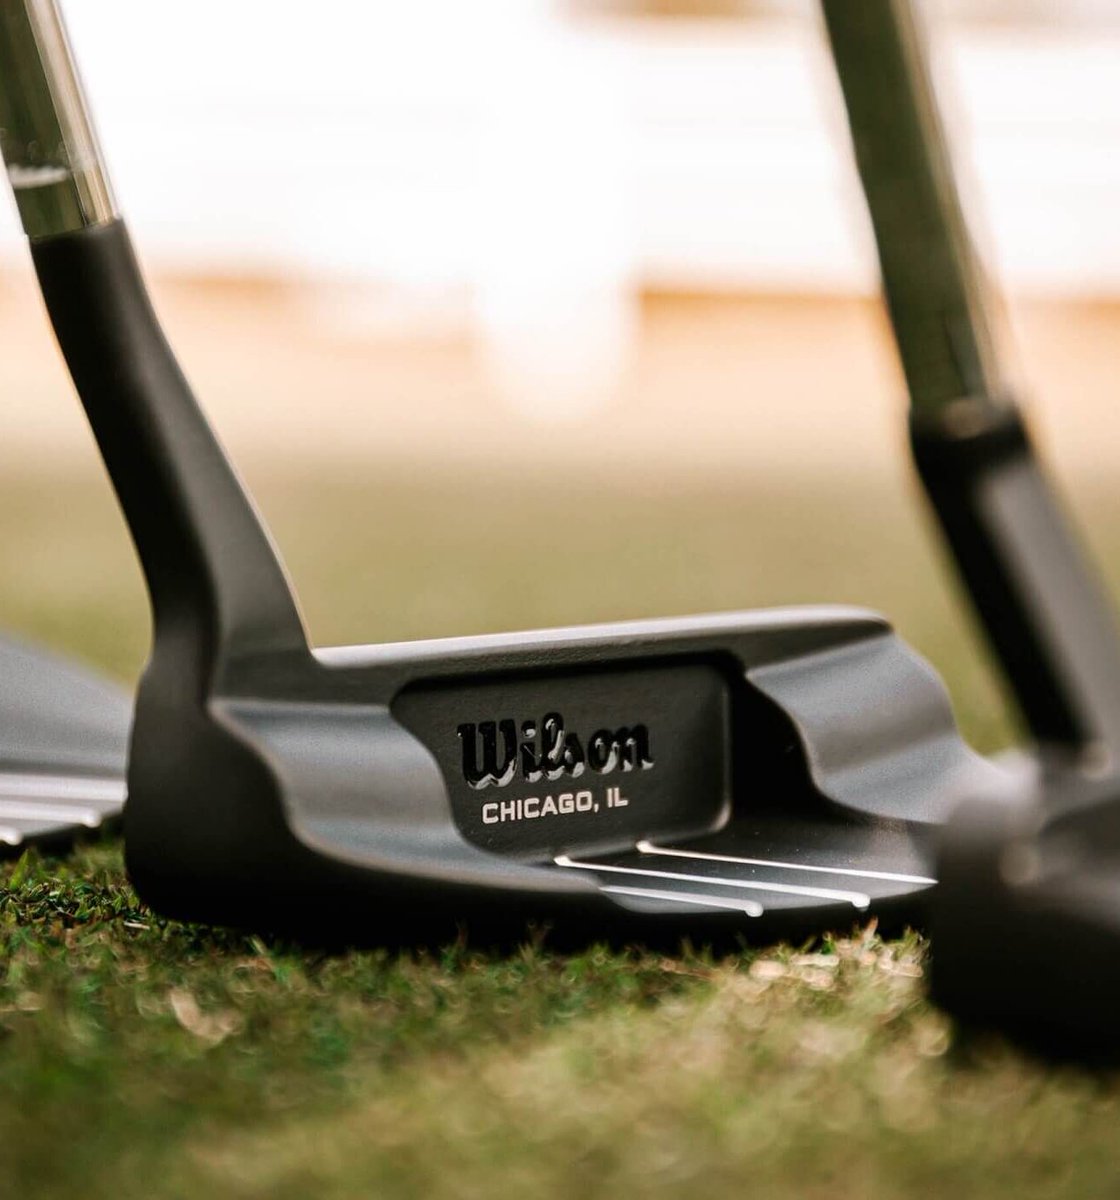 If you haven't taken @WilsonGolf putters seriously before...today might be the day 👀 They just dropped their updated Infinite lineup Check 'em out: bit.ly/43xXg2l